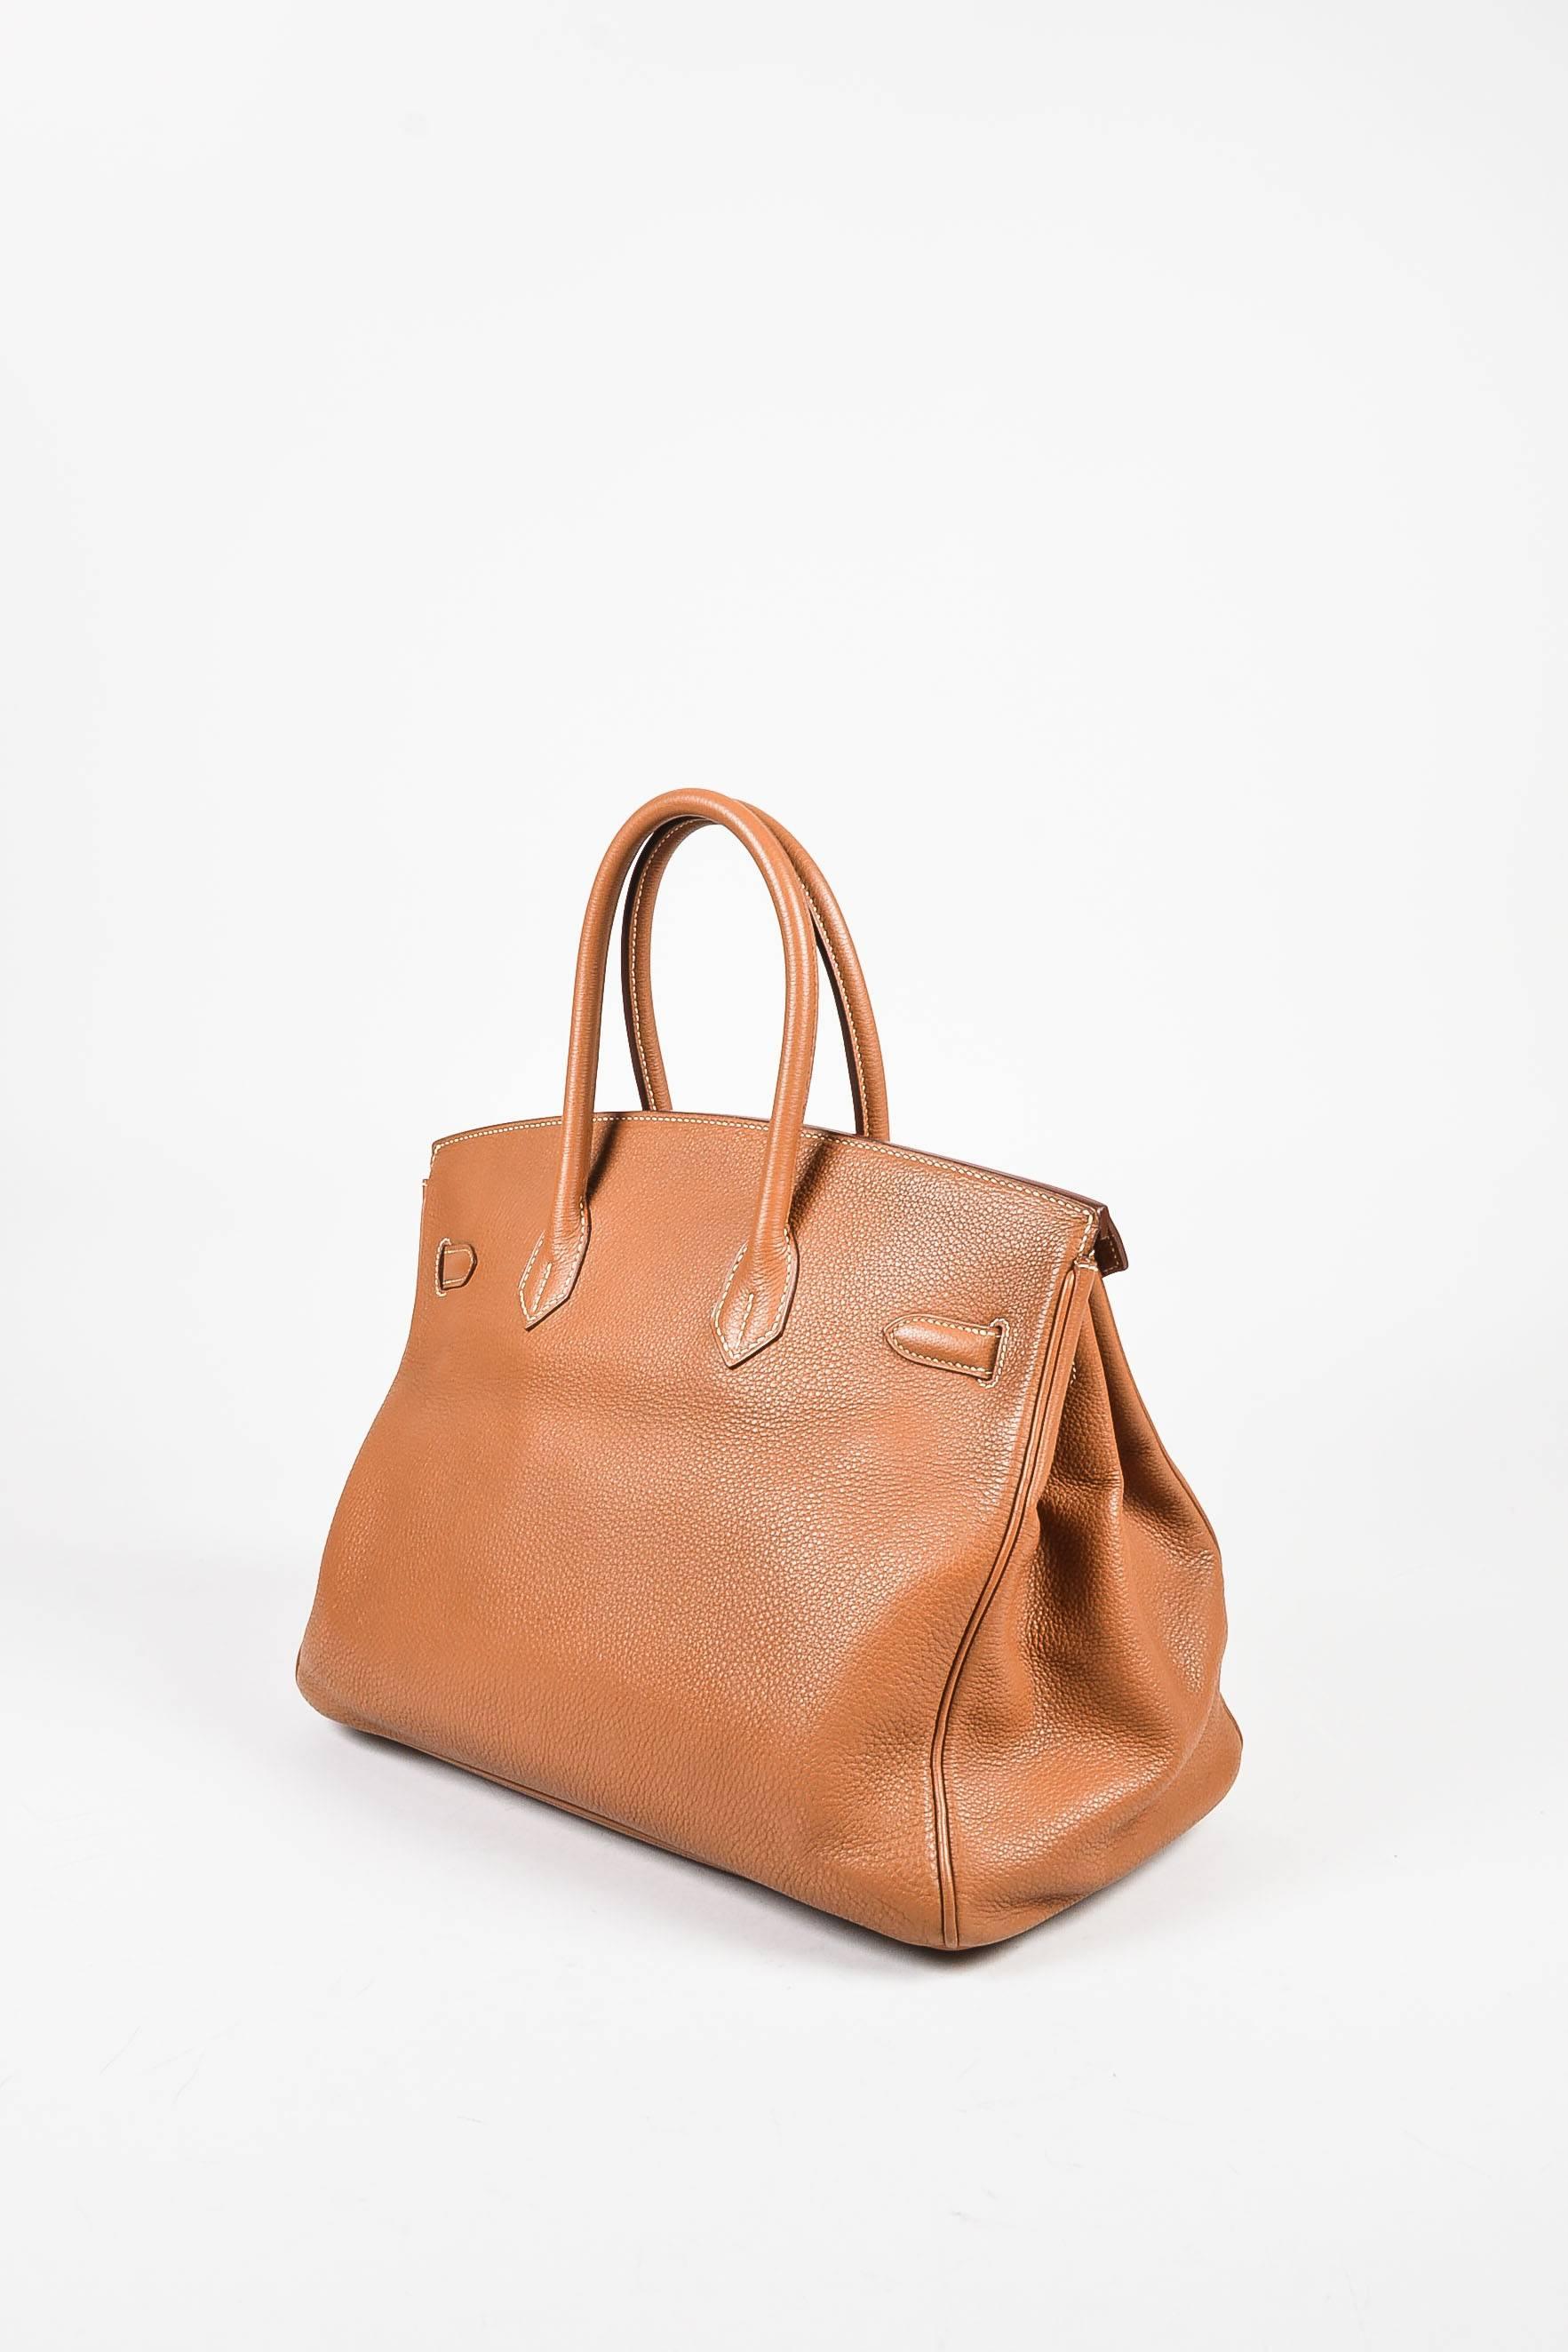 The timeless "Birkin" never goes out of style. This highly coveted tote is the perfect bag to carry your everyday essentials in classic sophistication. Supple clemence leather construction. Gold-tone hardware. Top rolled handles with